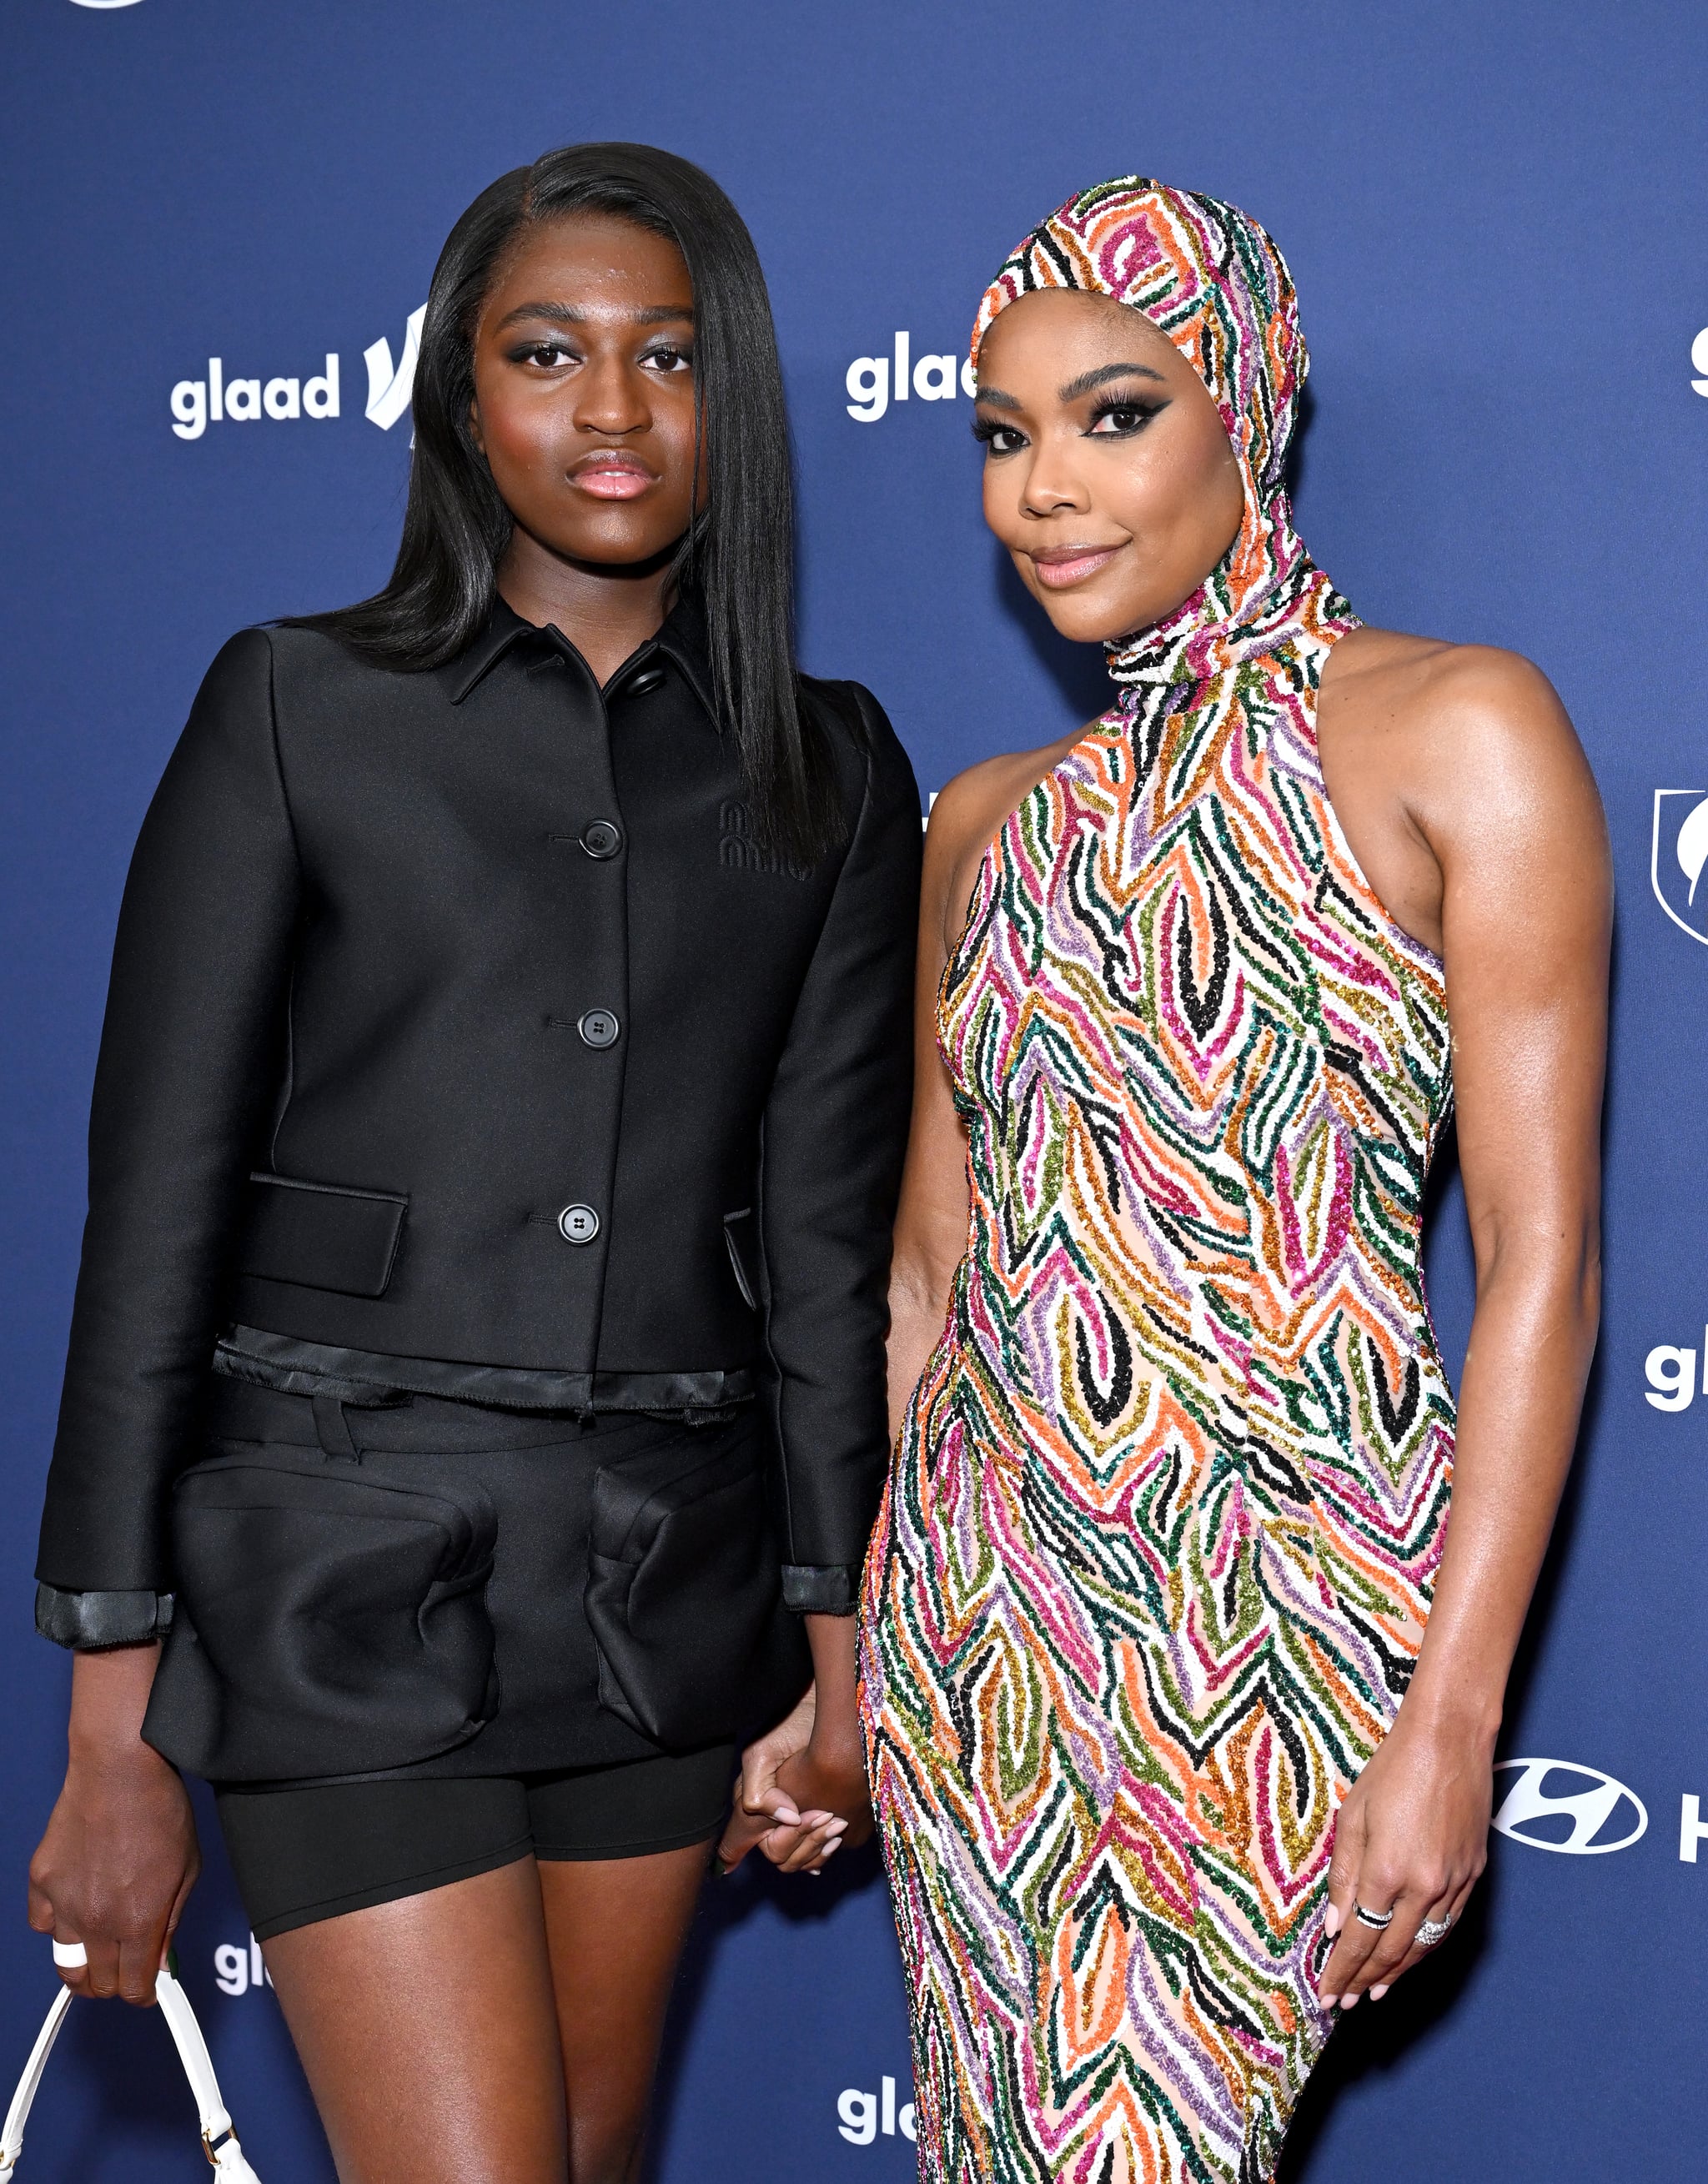 BEVERLY HILLS, CALIFORNIA - MARCH 30: Zaya Wade and Gabrielle Union attend the 34th Annual GLAAD Media Awards Los Angeles at The Beverly Hilton on March 30, 2023 in Beverly Hills, California. (Photo by Axelle/Bauer-Griffin/FilmMagic)